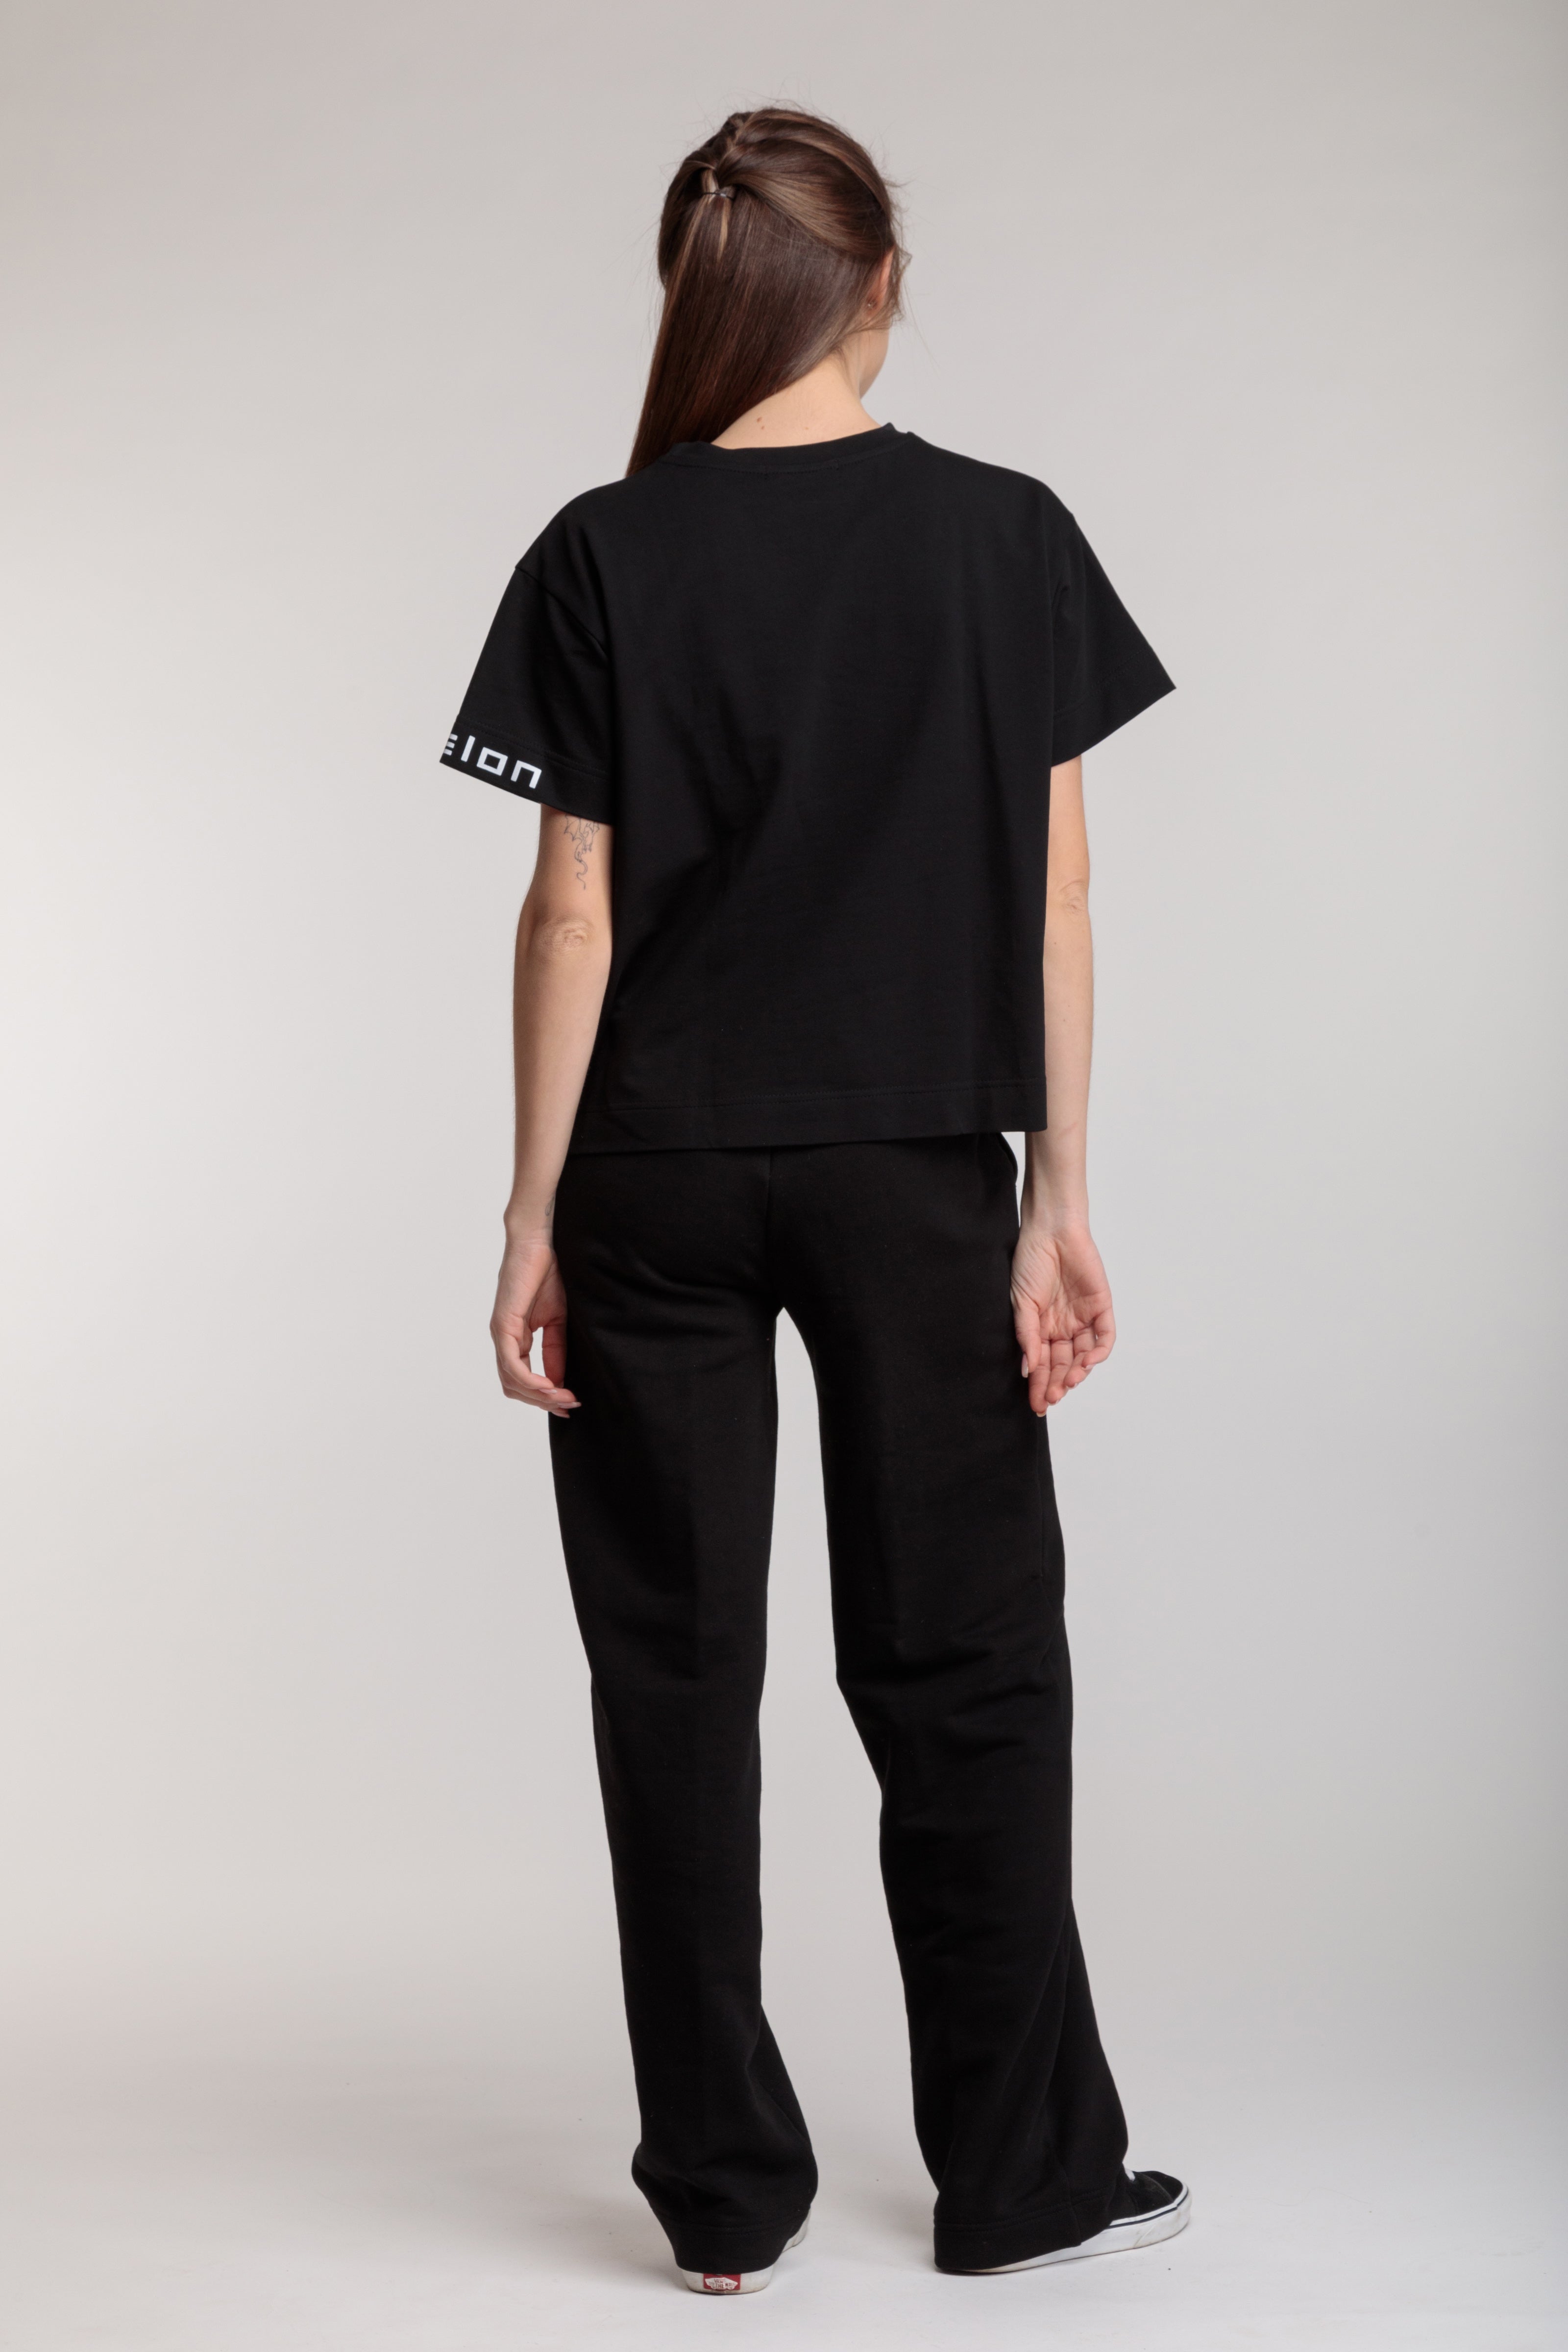 Straight women's T-shirt in black color, logo on the sleeve